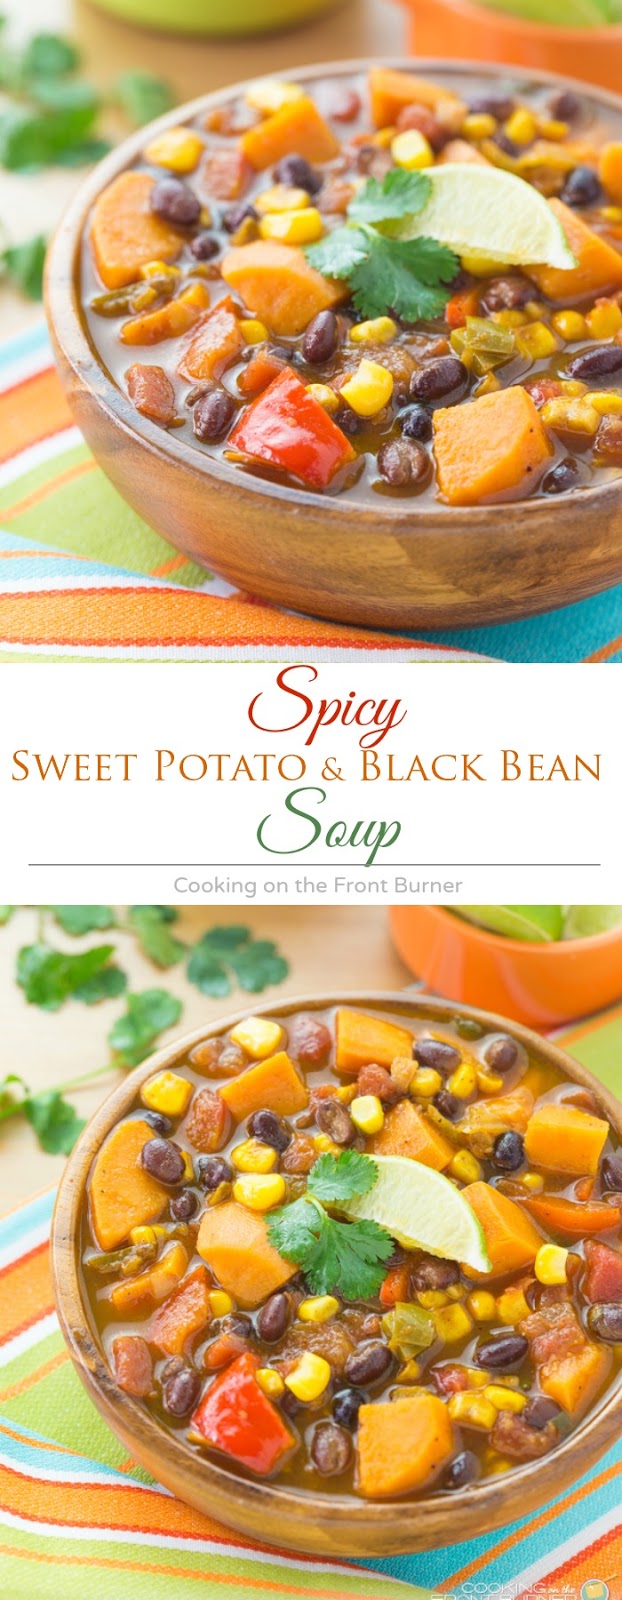 SWEET POTATO & BLACK BEAN SOUP | Cooking on the Front Burner